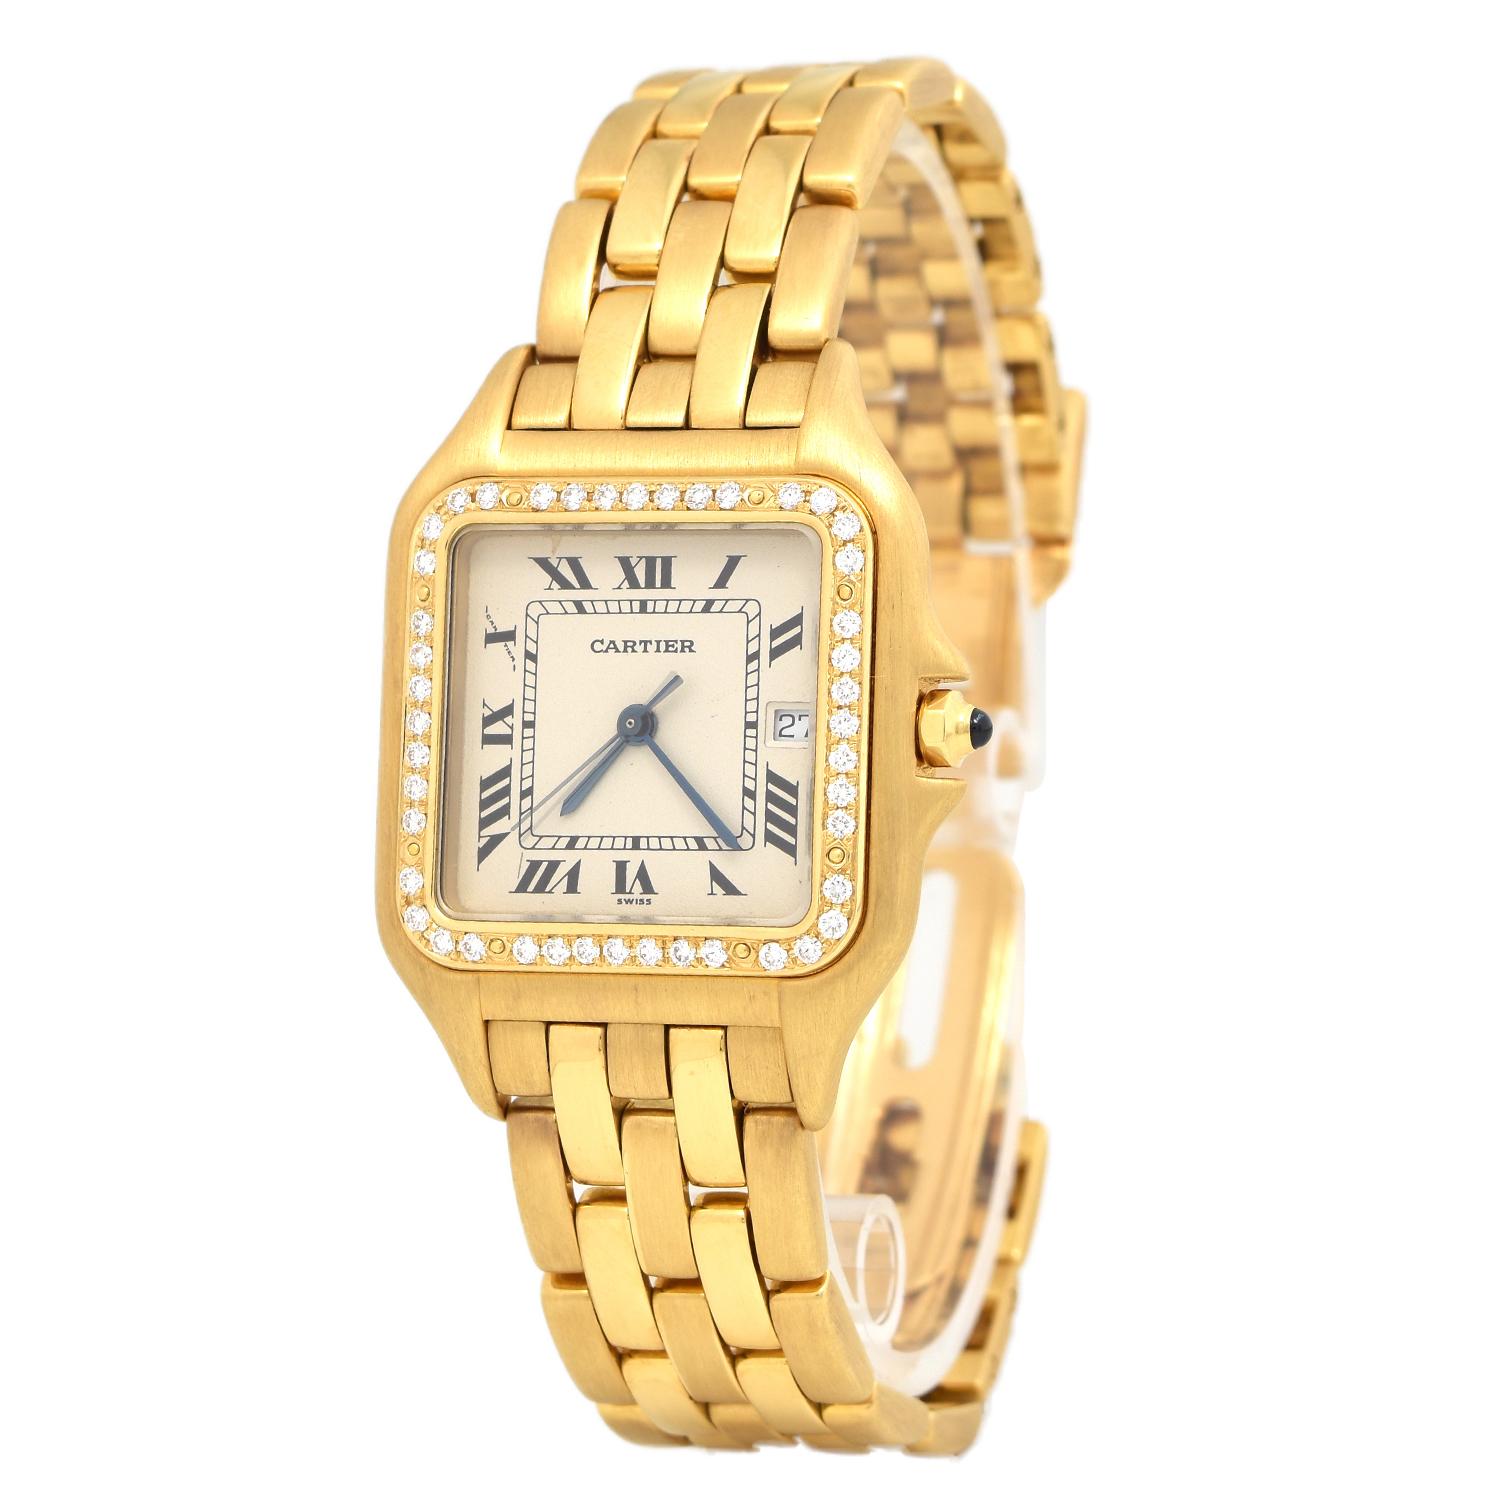 Brand: Cartier

Model: Panthere

Case: Beautiful 27mm 18k yellow gold case

Dial: Gorgeous white dial with Roman numeral indexes

Bracelet: Fitted on a yellow gold Cartier bracelet

Accessories: Box & Papers

Notes: Elegant Cartier Panthere watch